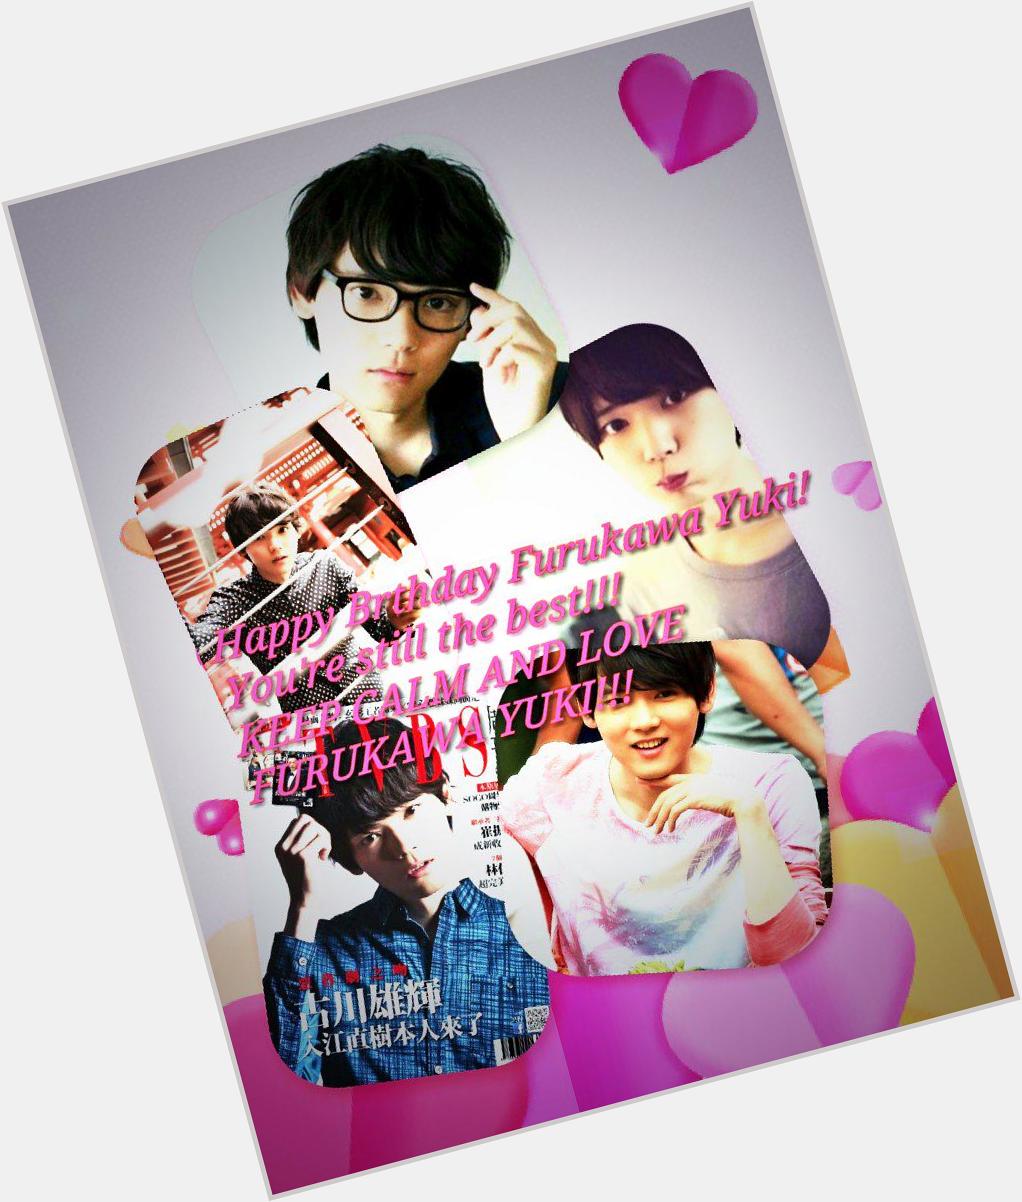 Happy birthday Yuki Furukawa , long life and become an actor who remains dear to his fans! 